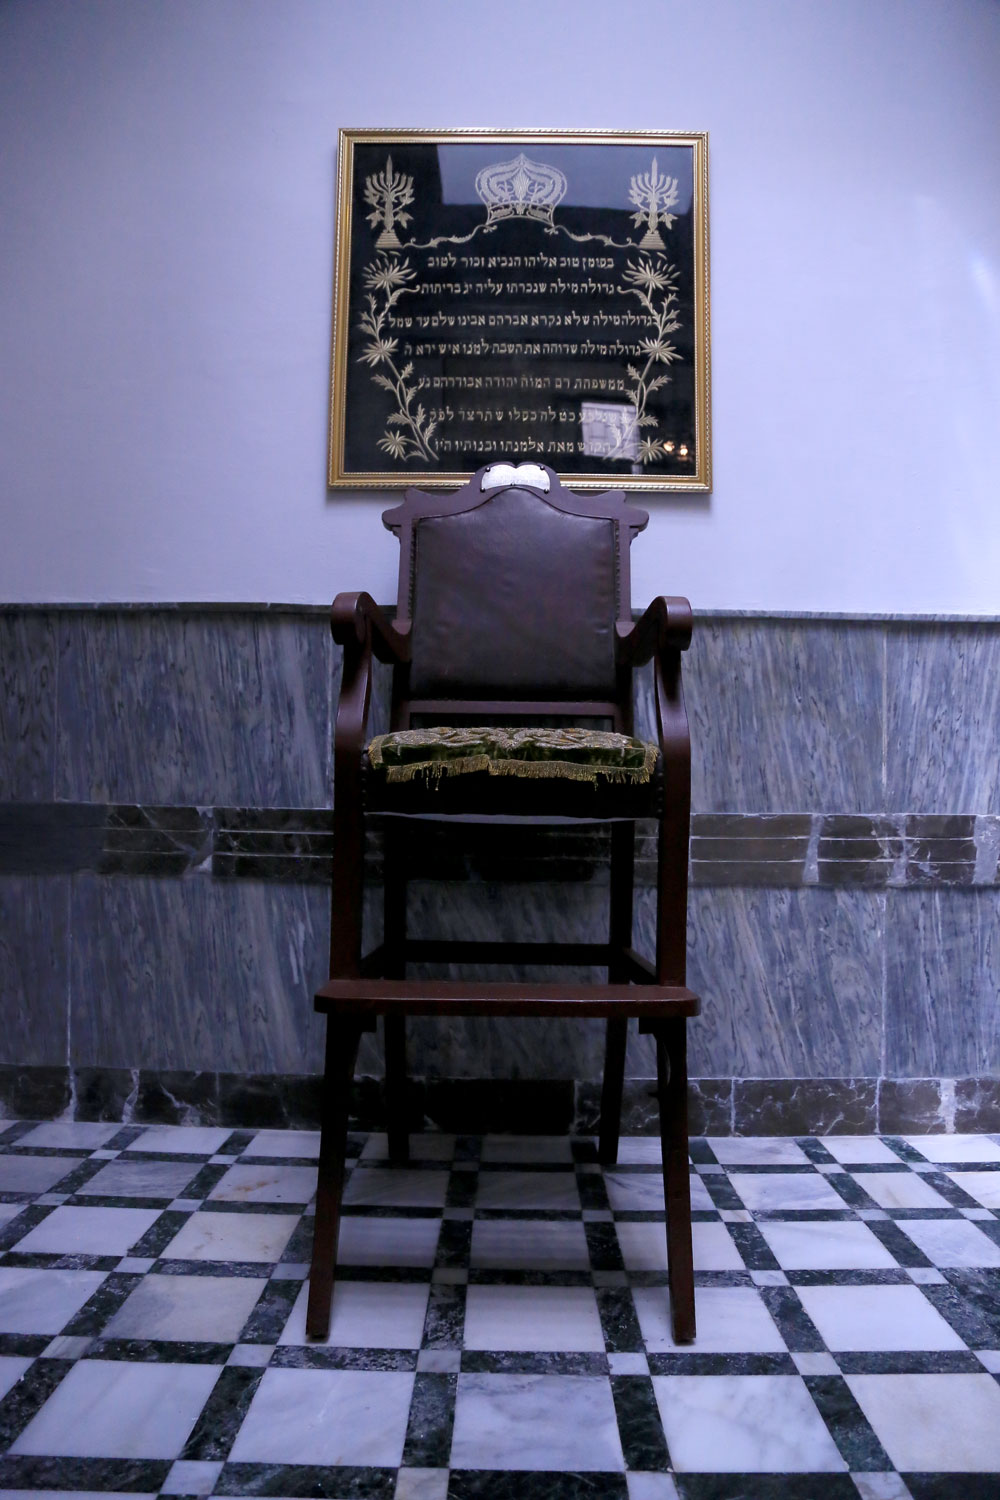 View of an elevated chair and framed tapestry